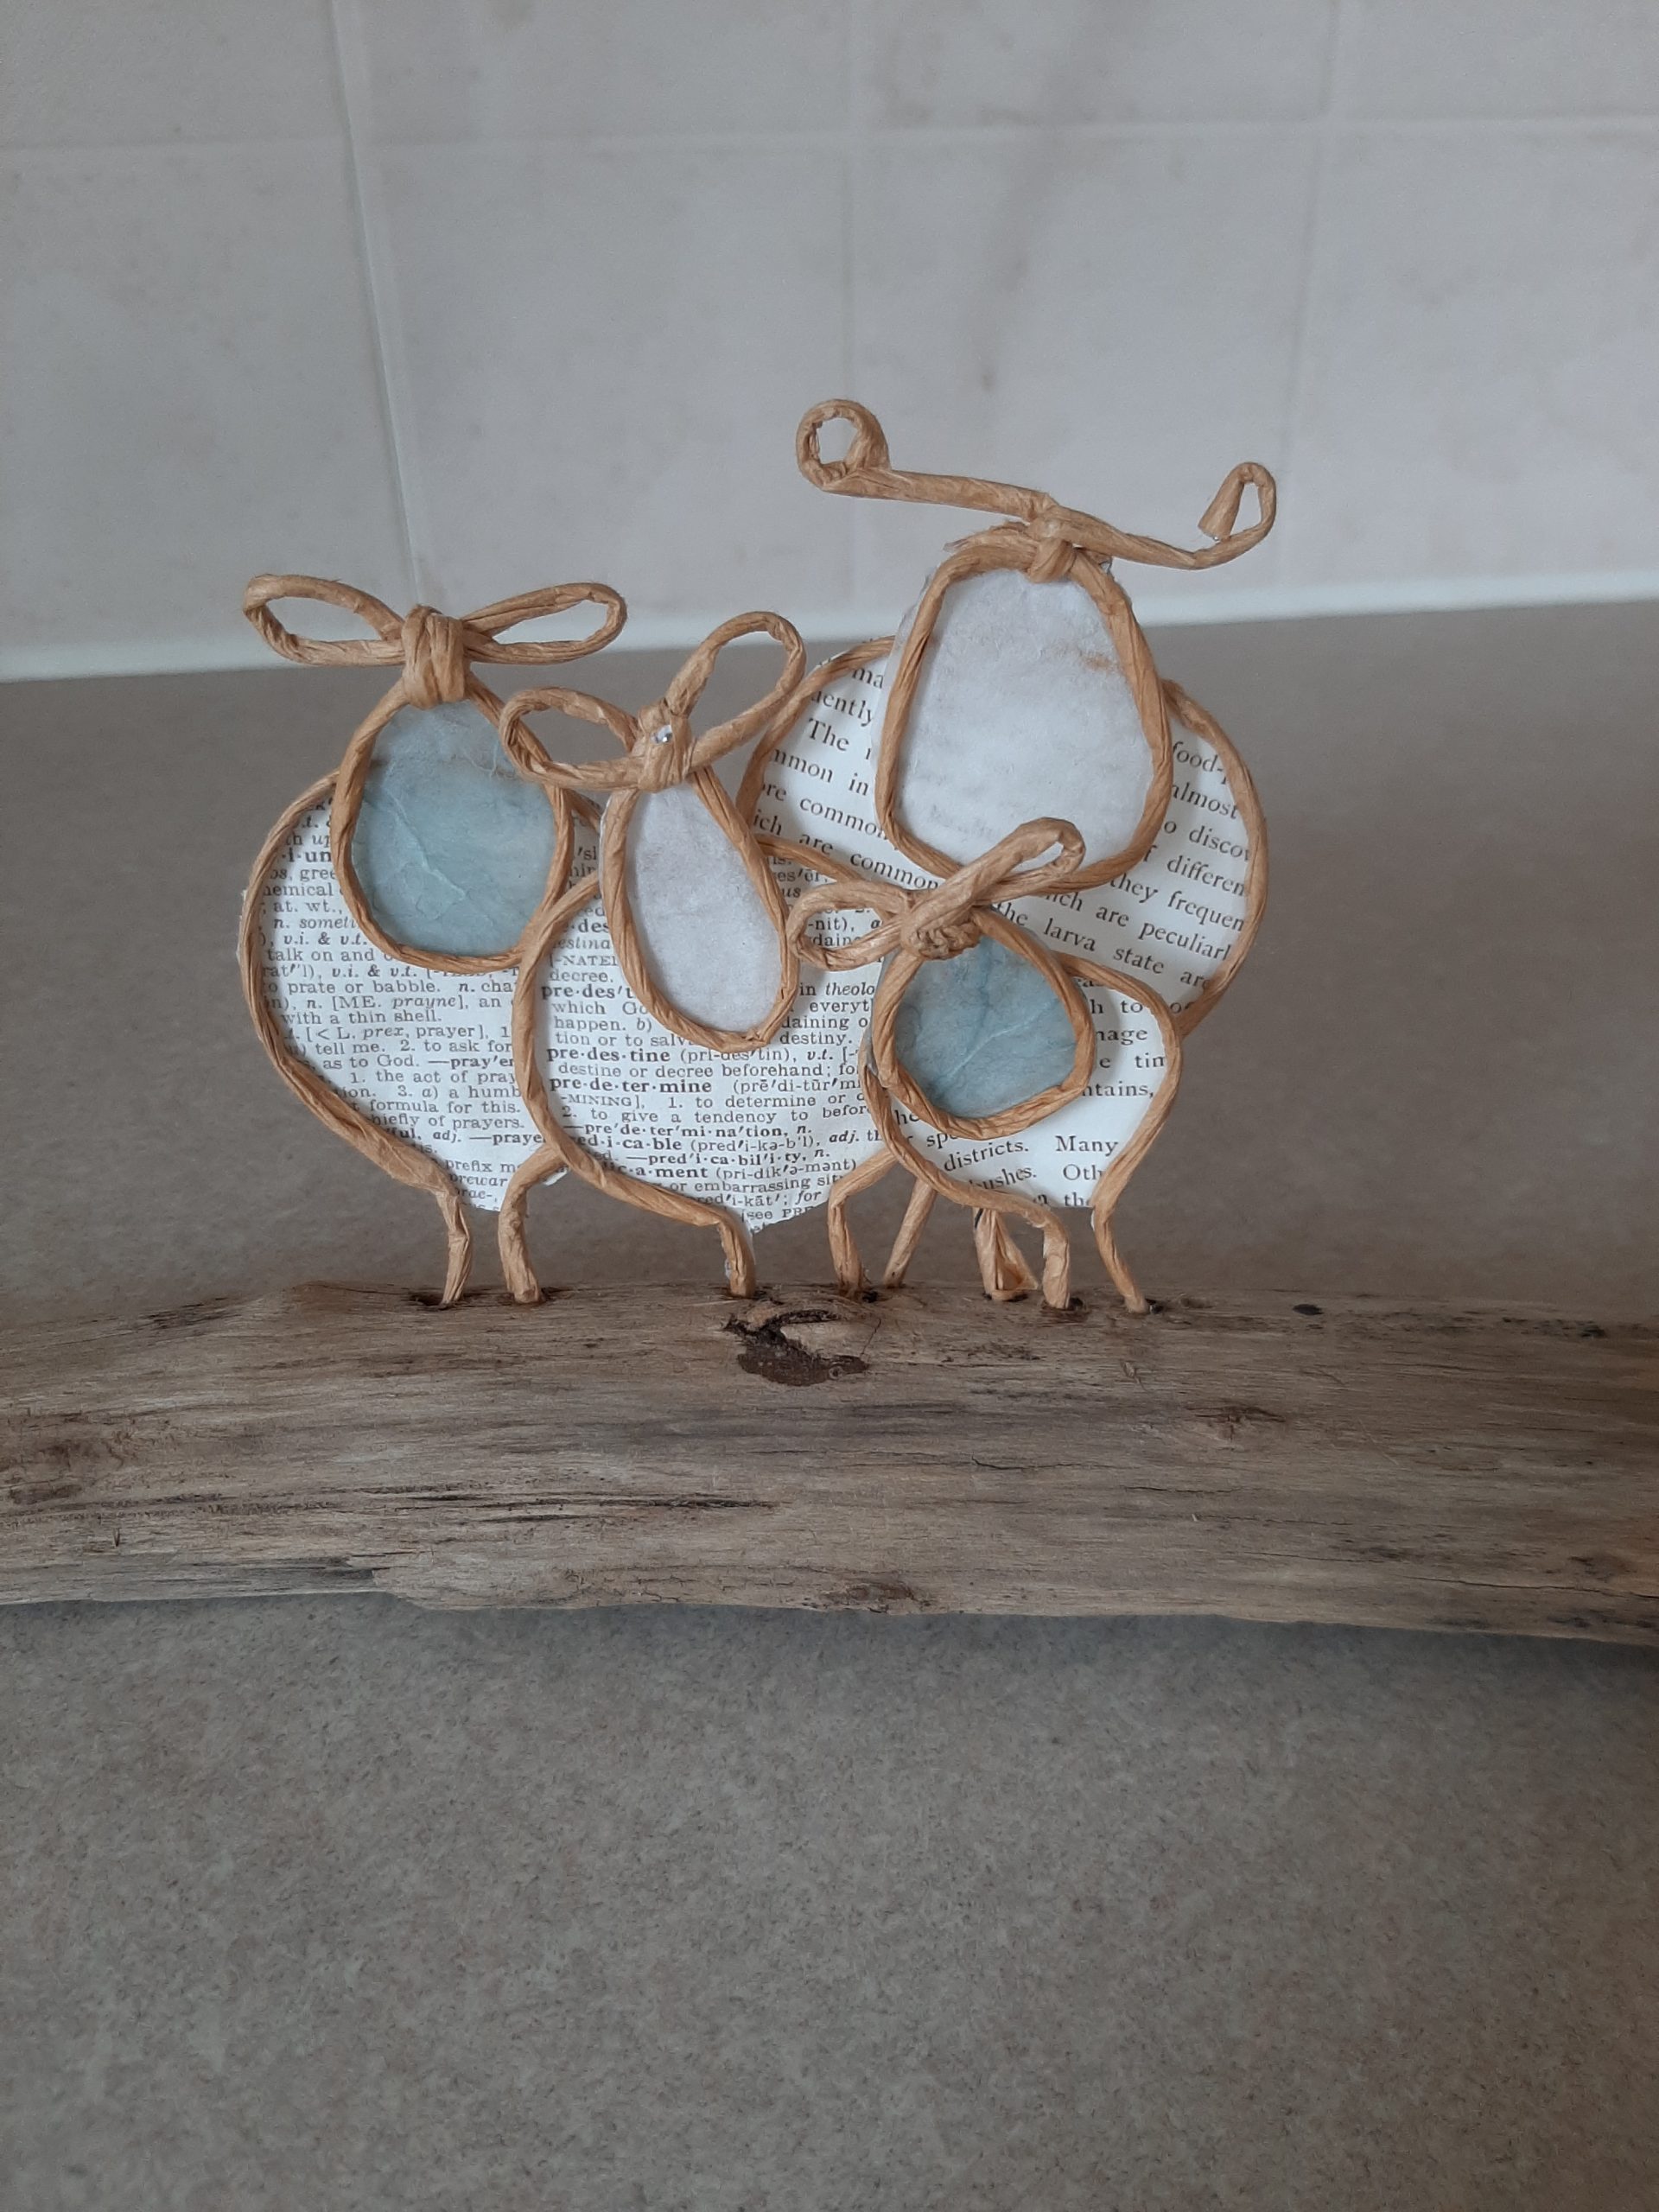 This is one of Kaylee's art creations of a family of sheep made with paper wire and paper on driftwood.